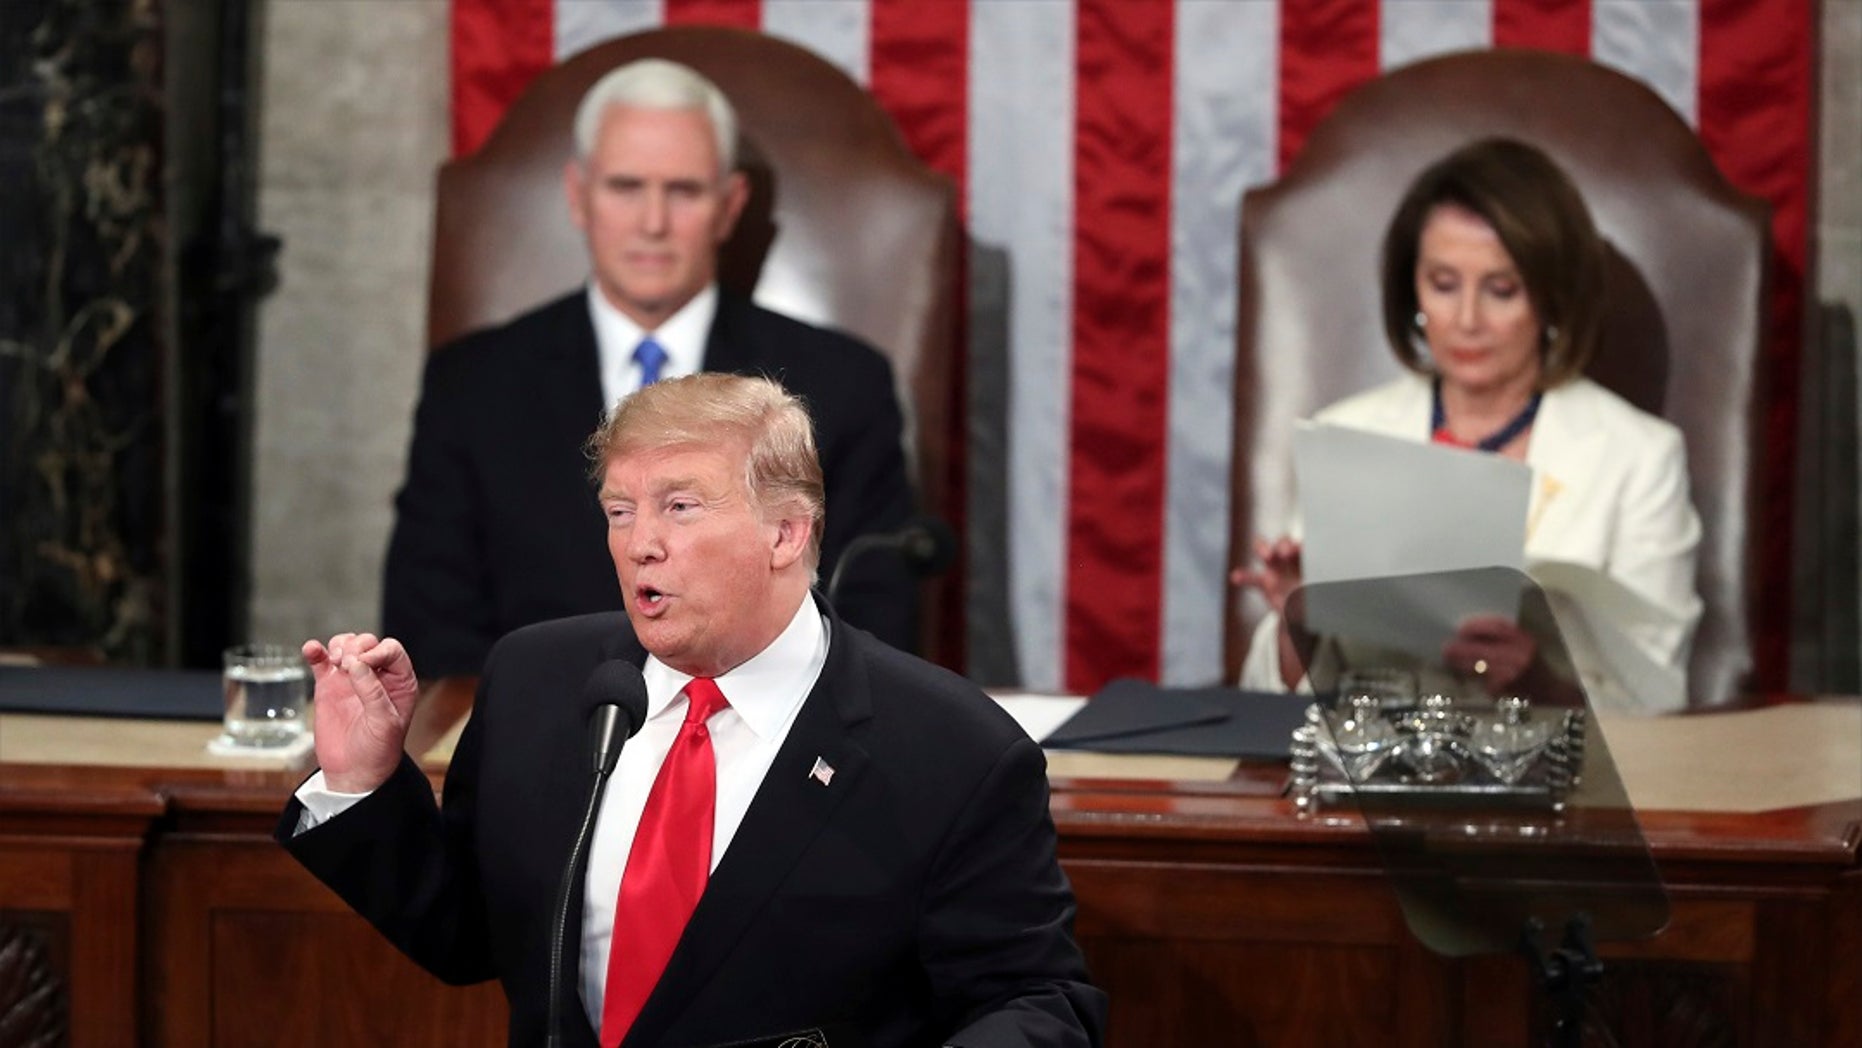 Social media offers theories on what Pelosi read during State of the Union